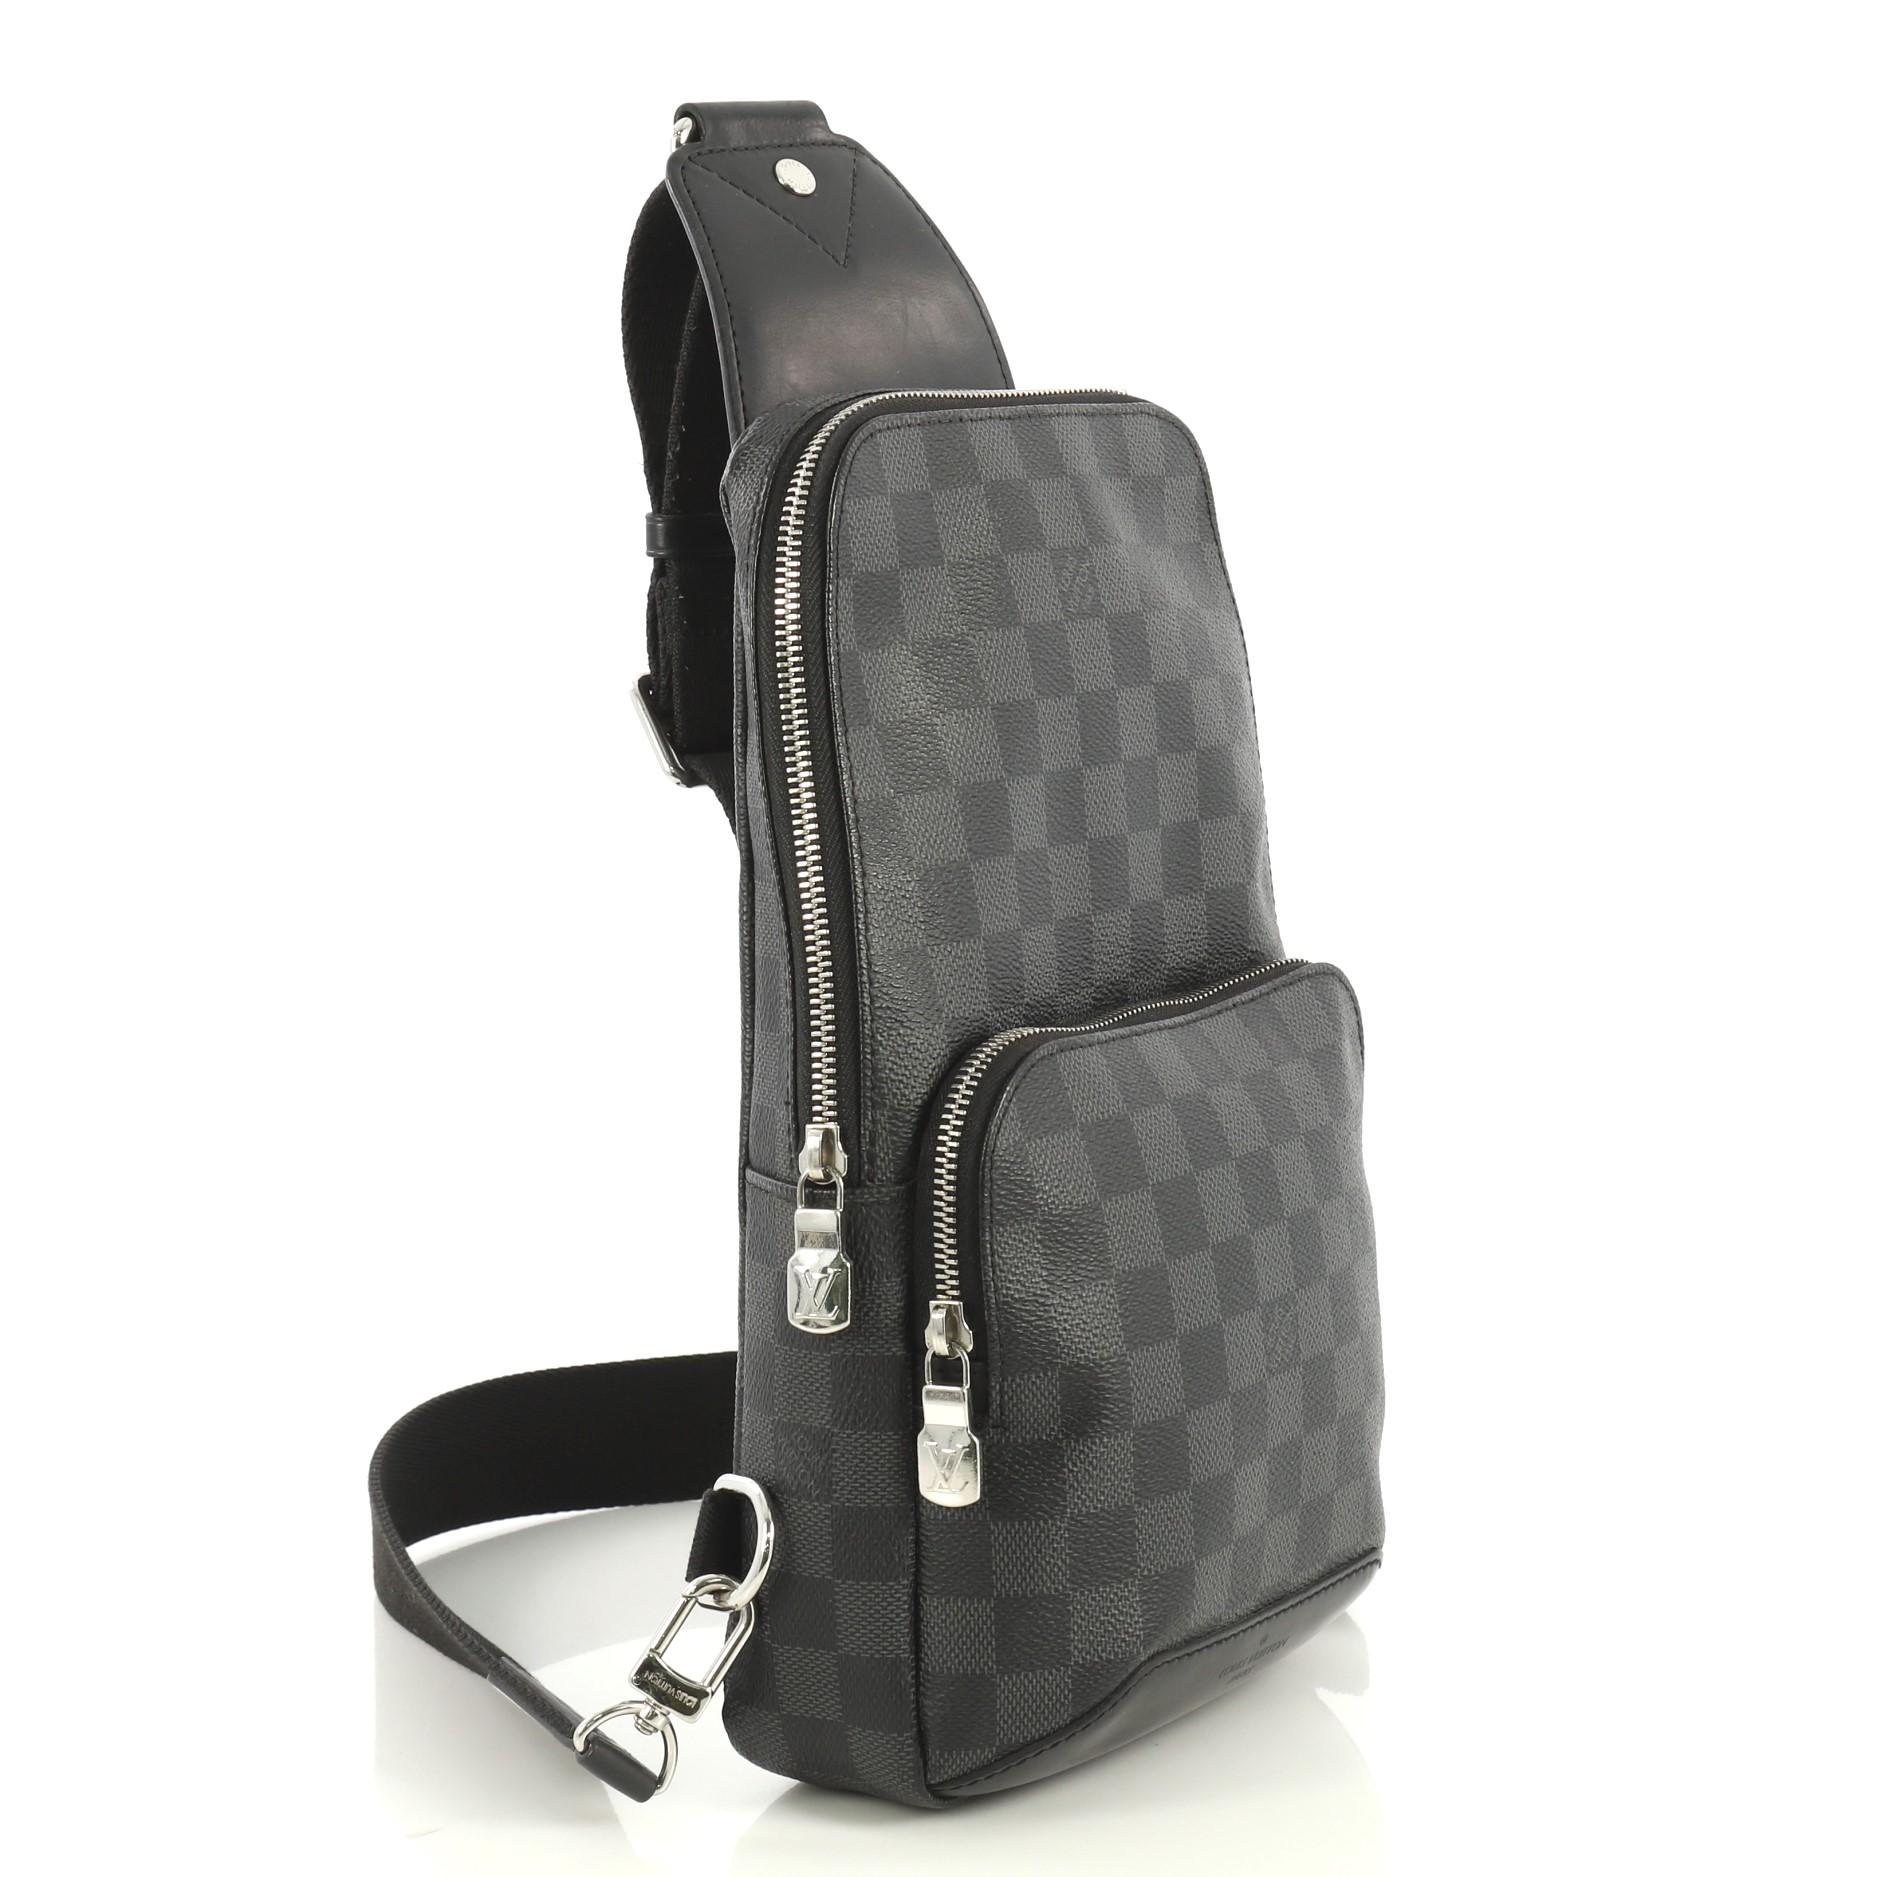 This Louis Vuitton Avenue Sling Bag Damier Graphite, crafted from damier graphite coated canvas, features an adjustable fabric strap, exterior front zip pocket, and silver-tone hardware. Its zip closure opens to a black fabric interior with slip